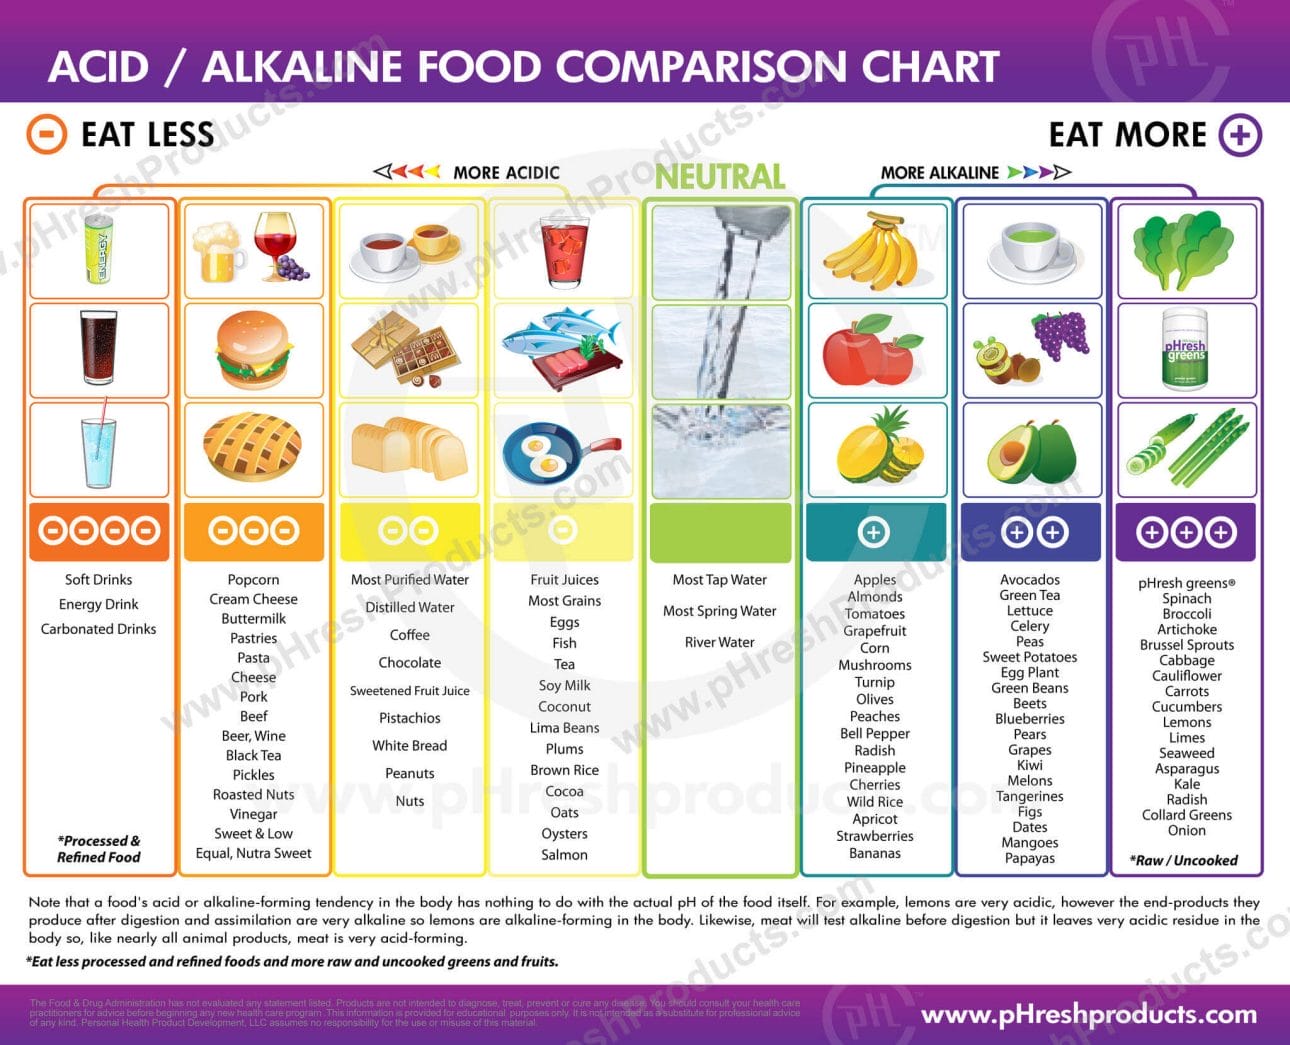 The Benefits Of An Alkaline Diet And Body